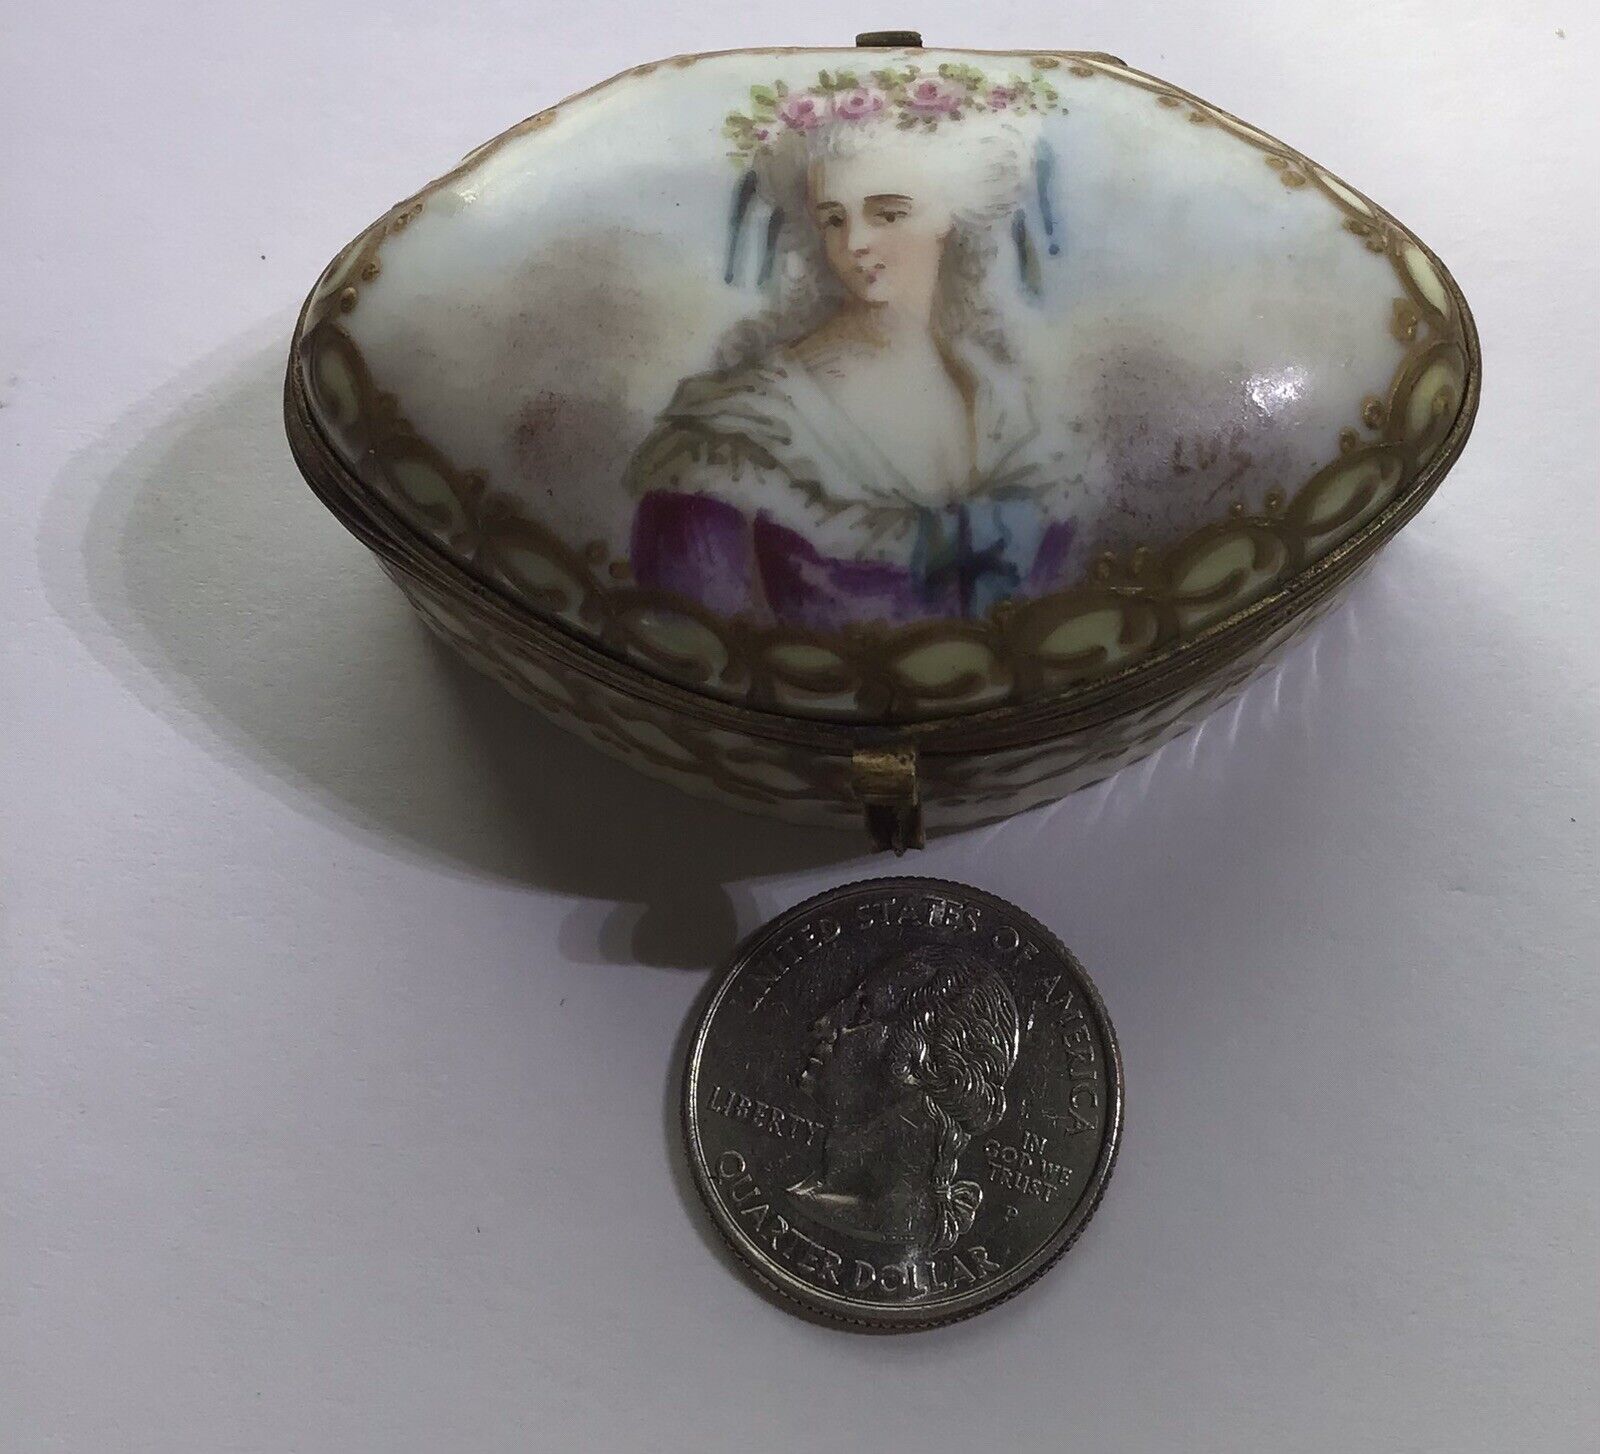 Circa 1900 French Limoges Victorian Lady Patch/Pill/Trinket Box Estate - Signed